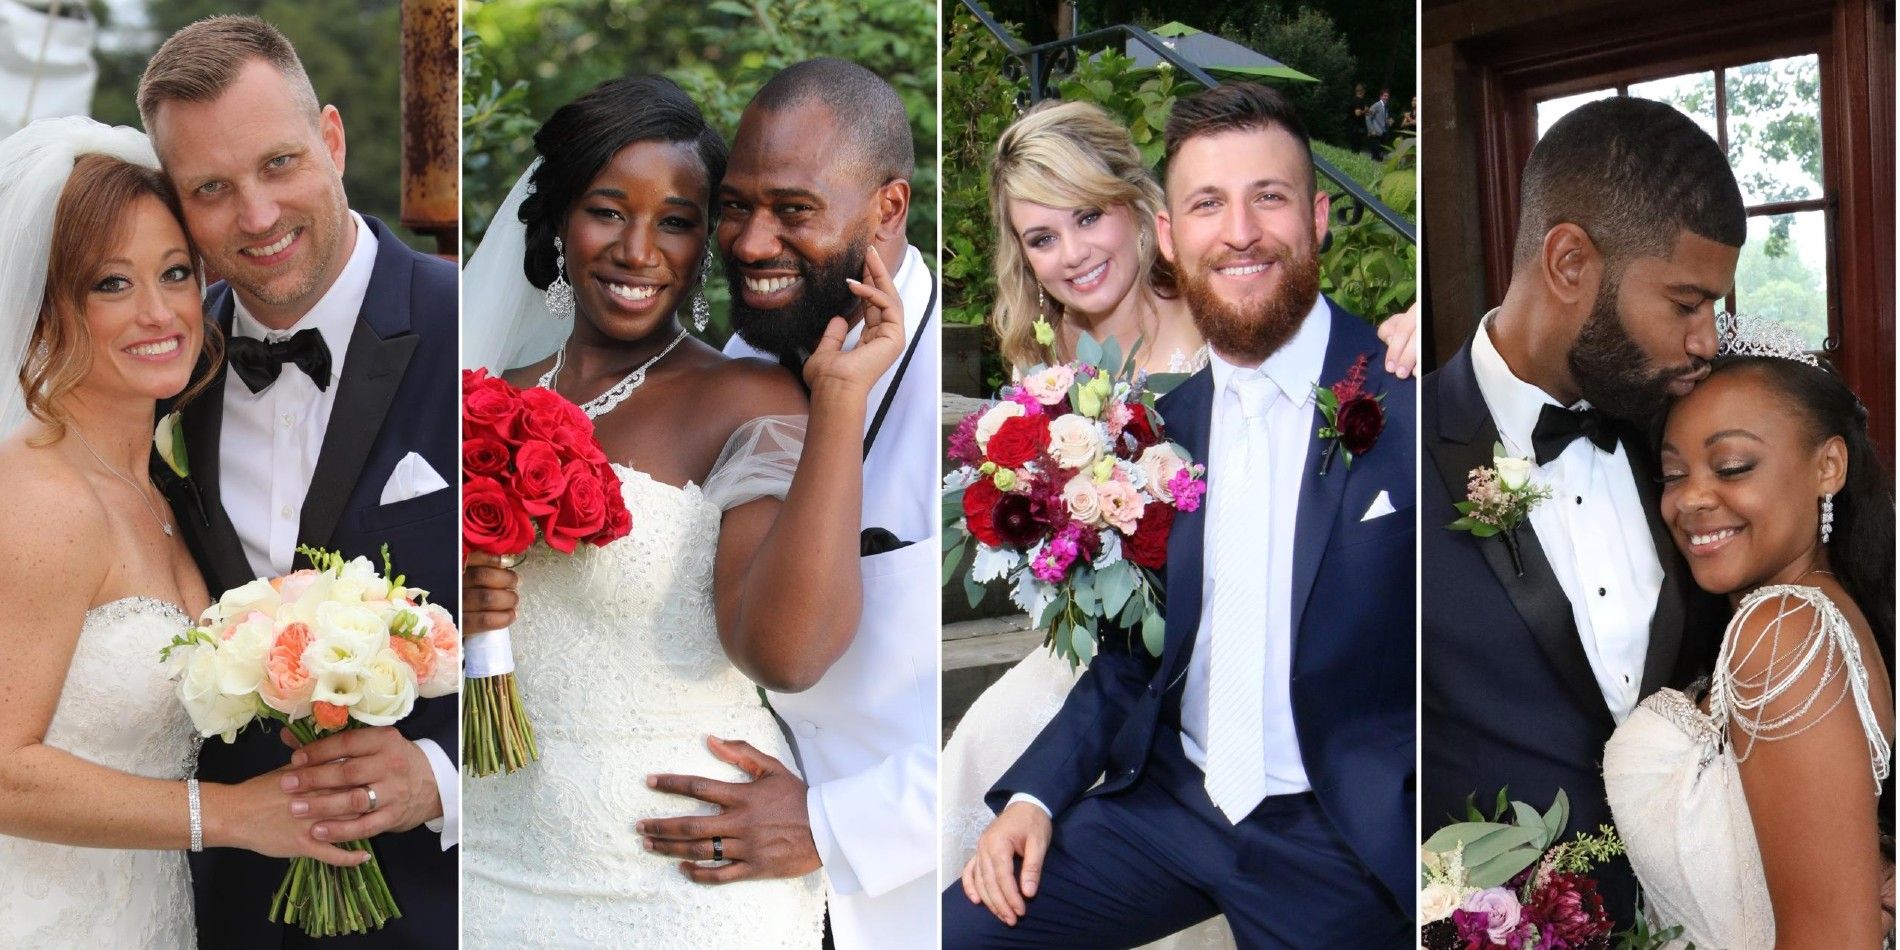 married at first sight season 8 couples